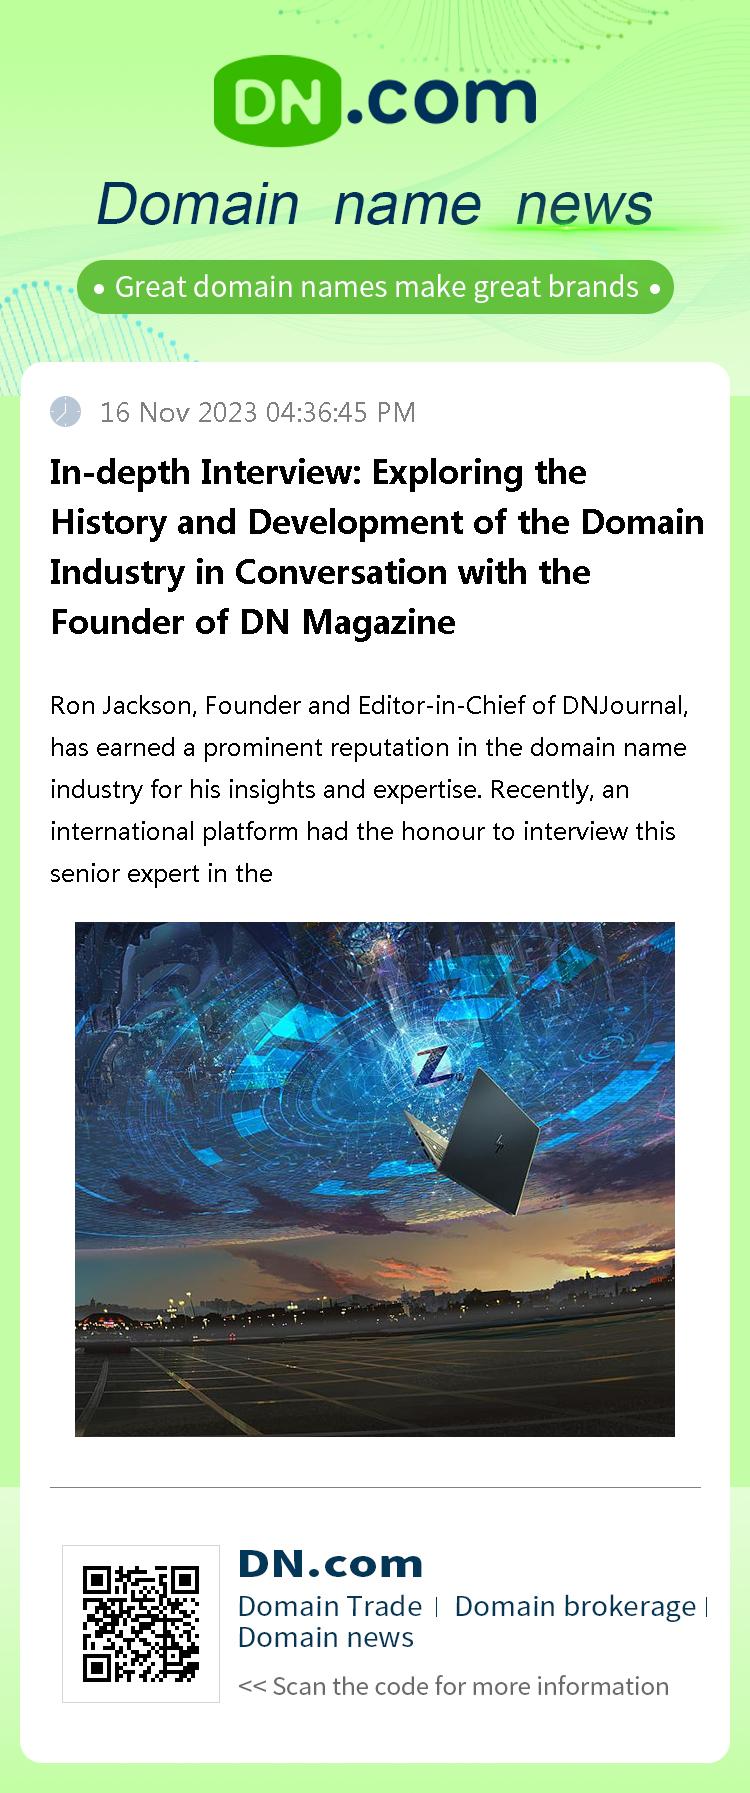 In-depth Interview: Exploring the History and Development of the Domain Industry in Conversation with the Founder of DN Magazine